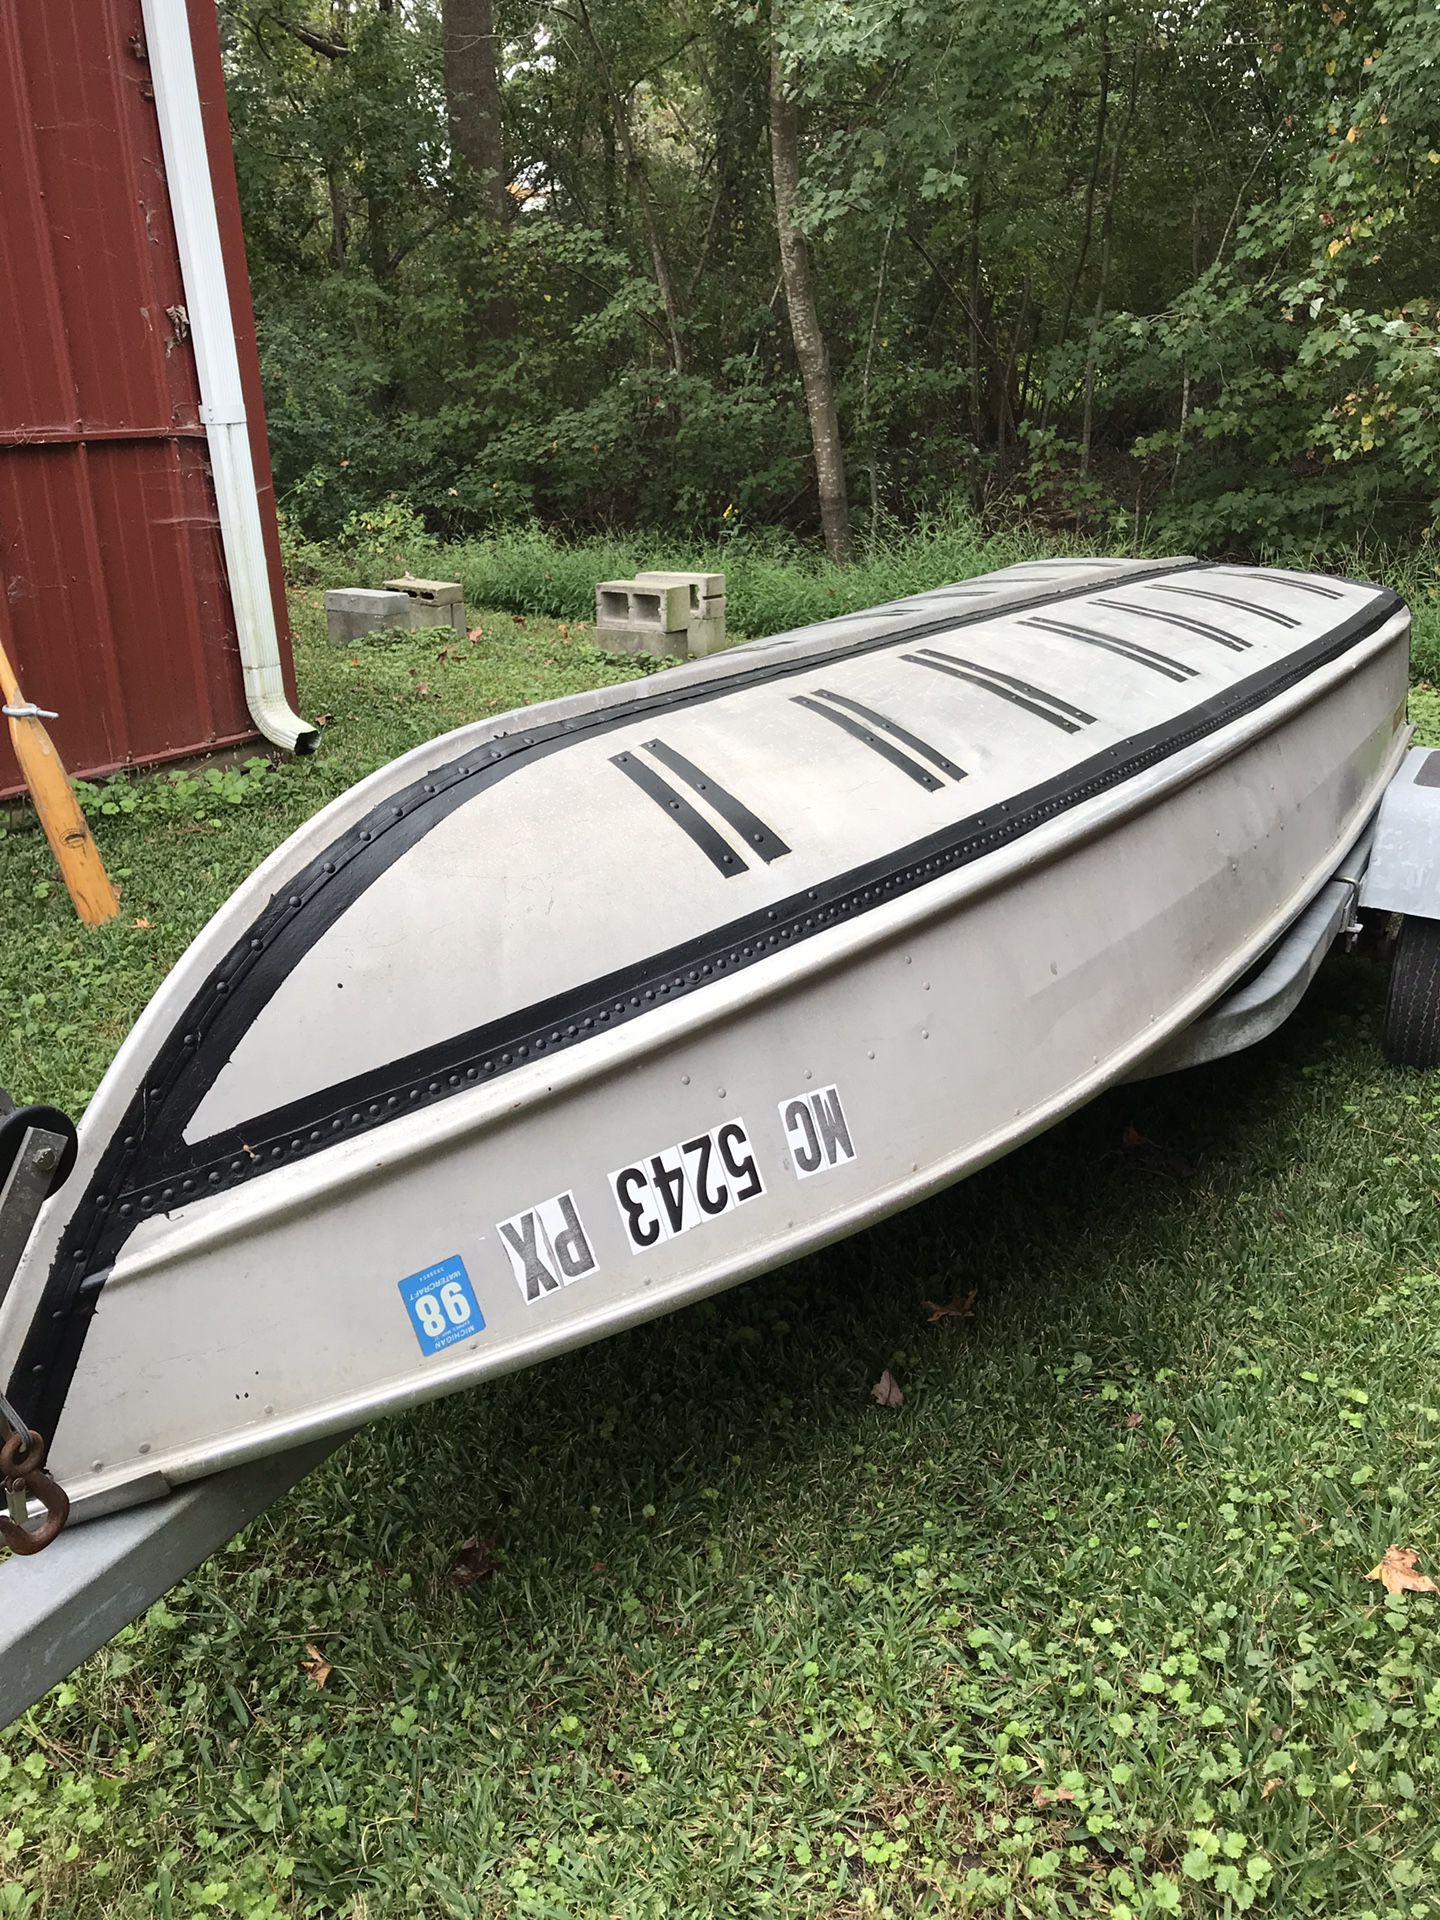 12 ft. “V” aluminum boat with two oars